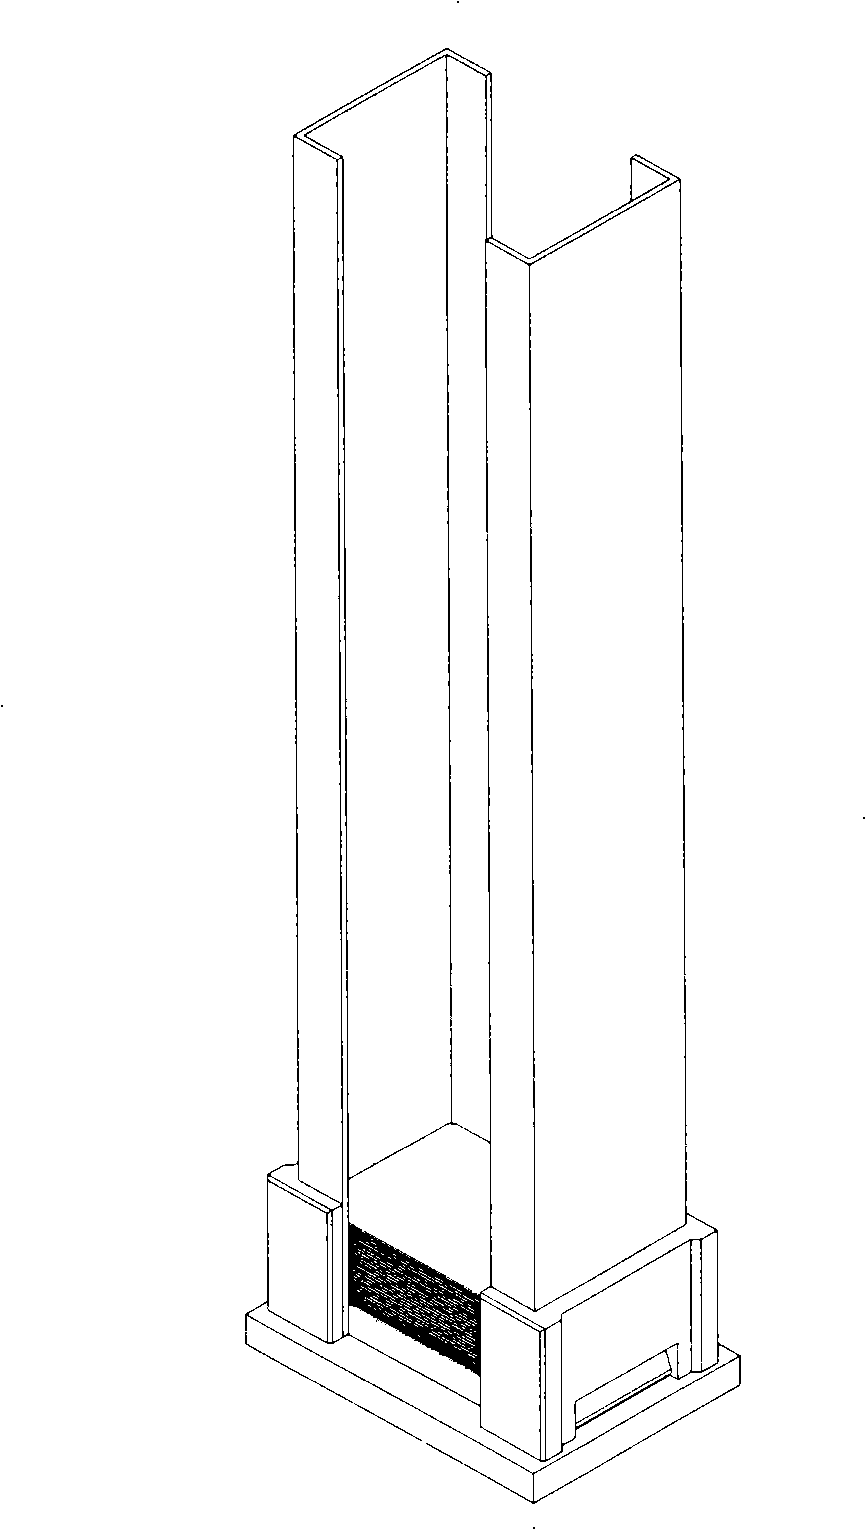 Intelligent Plug-in containing case special for small cards and uses thereof